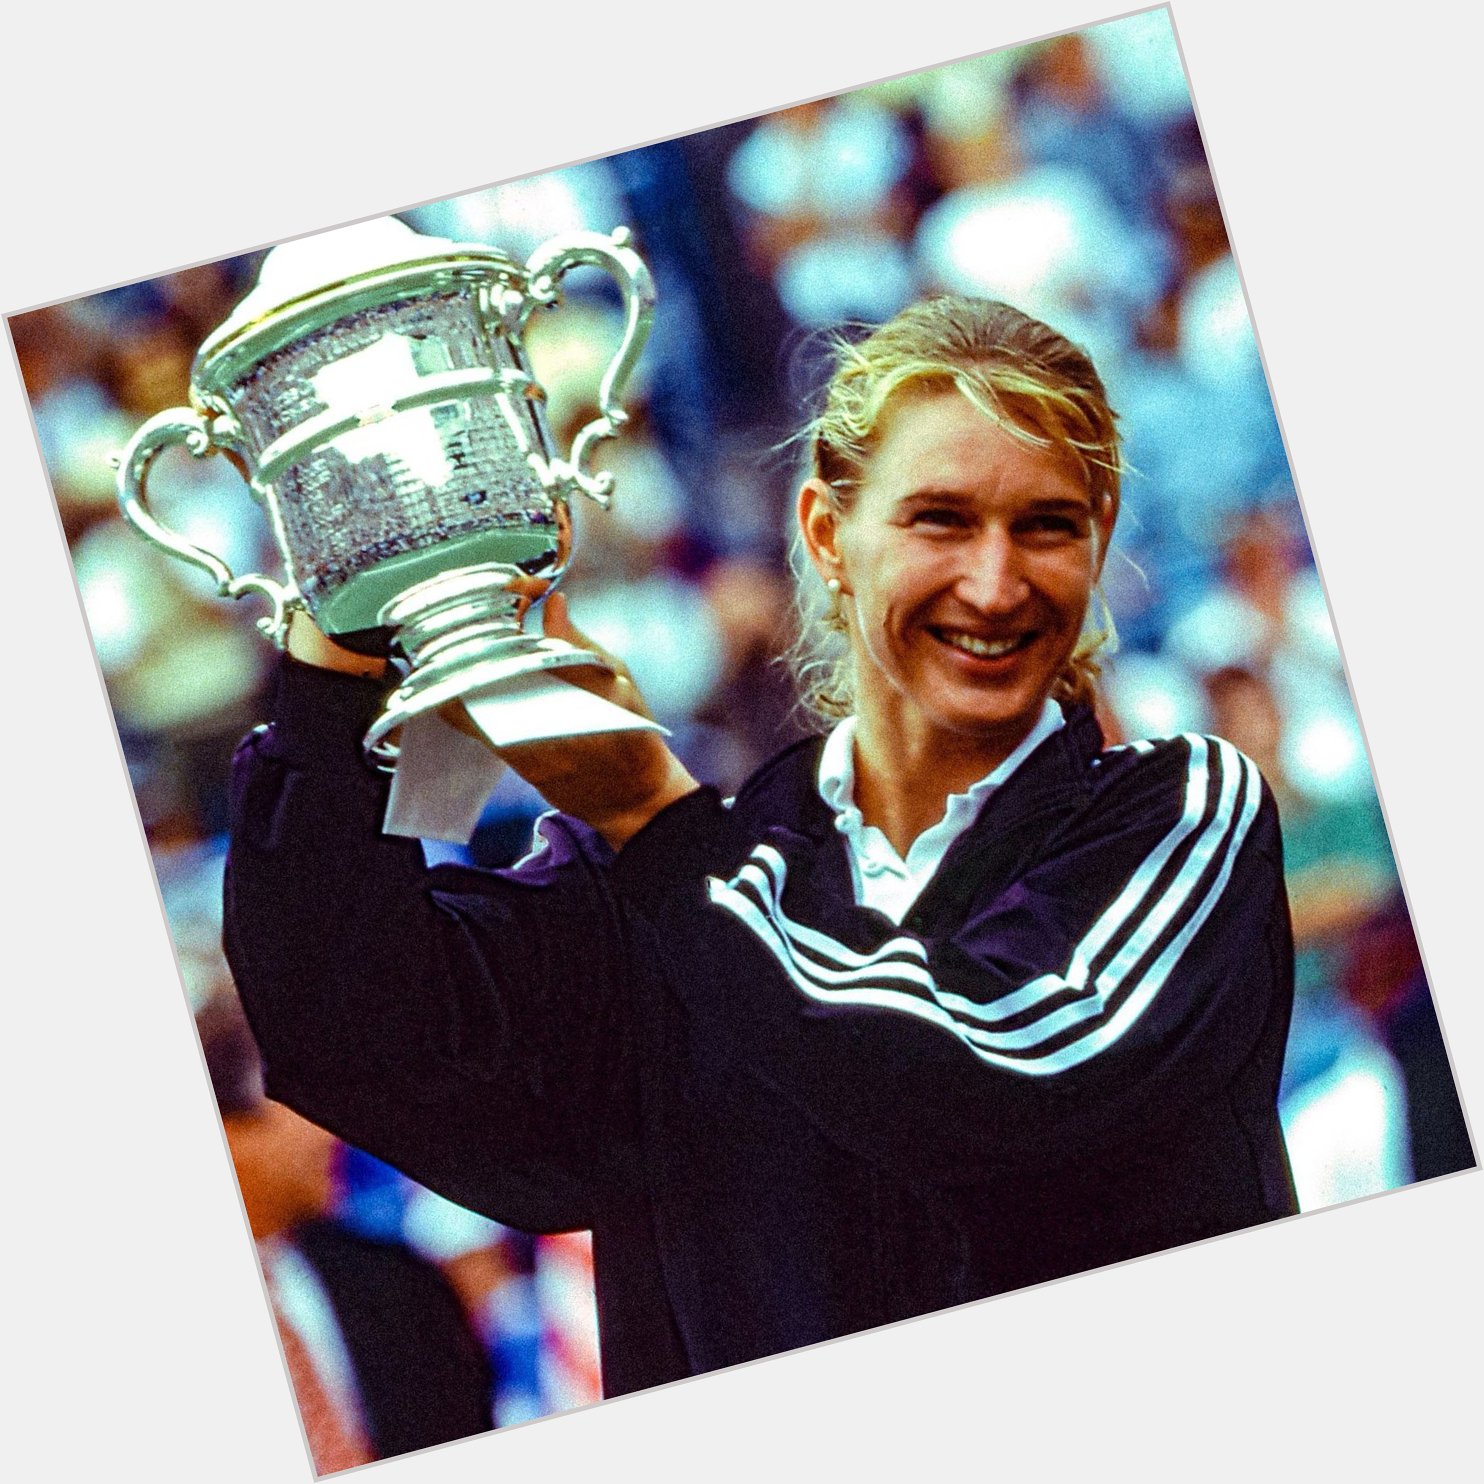 Happy Birthday to the Goddess, Steffi Graf the real GOAT 